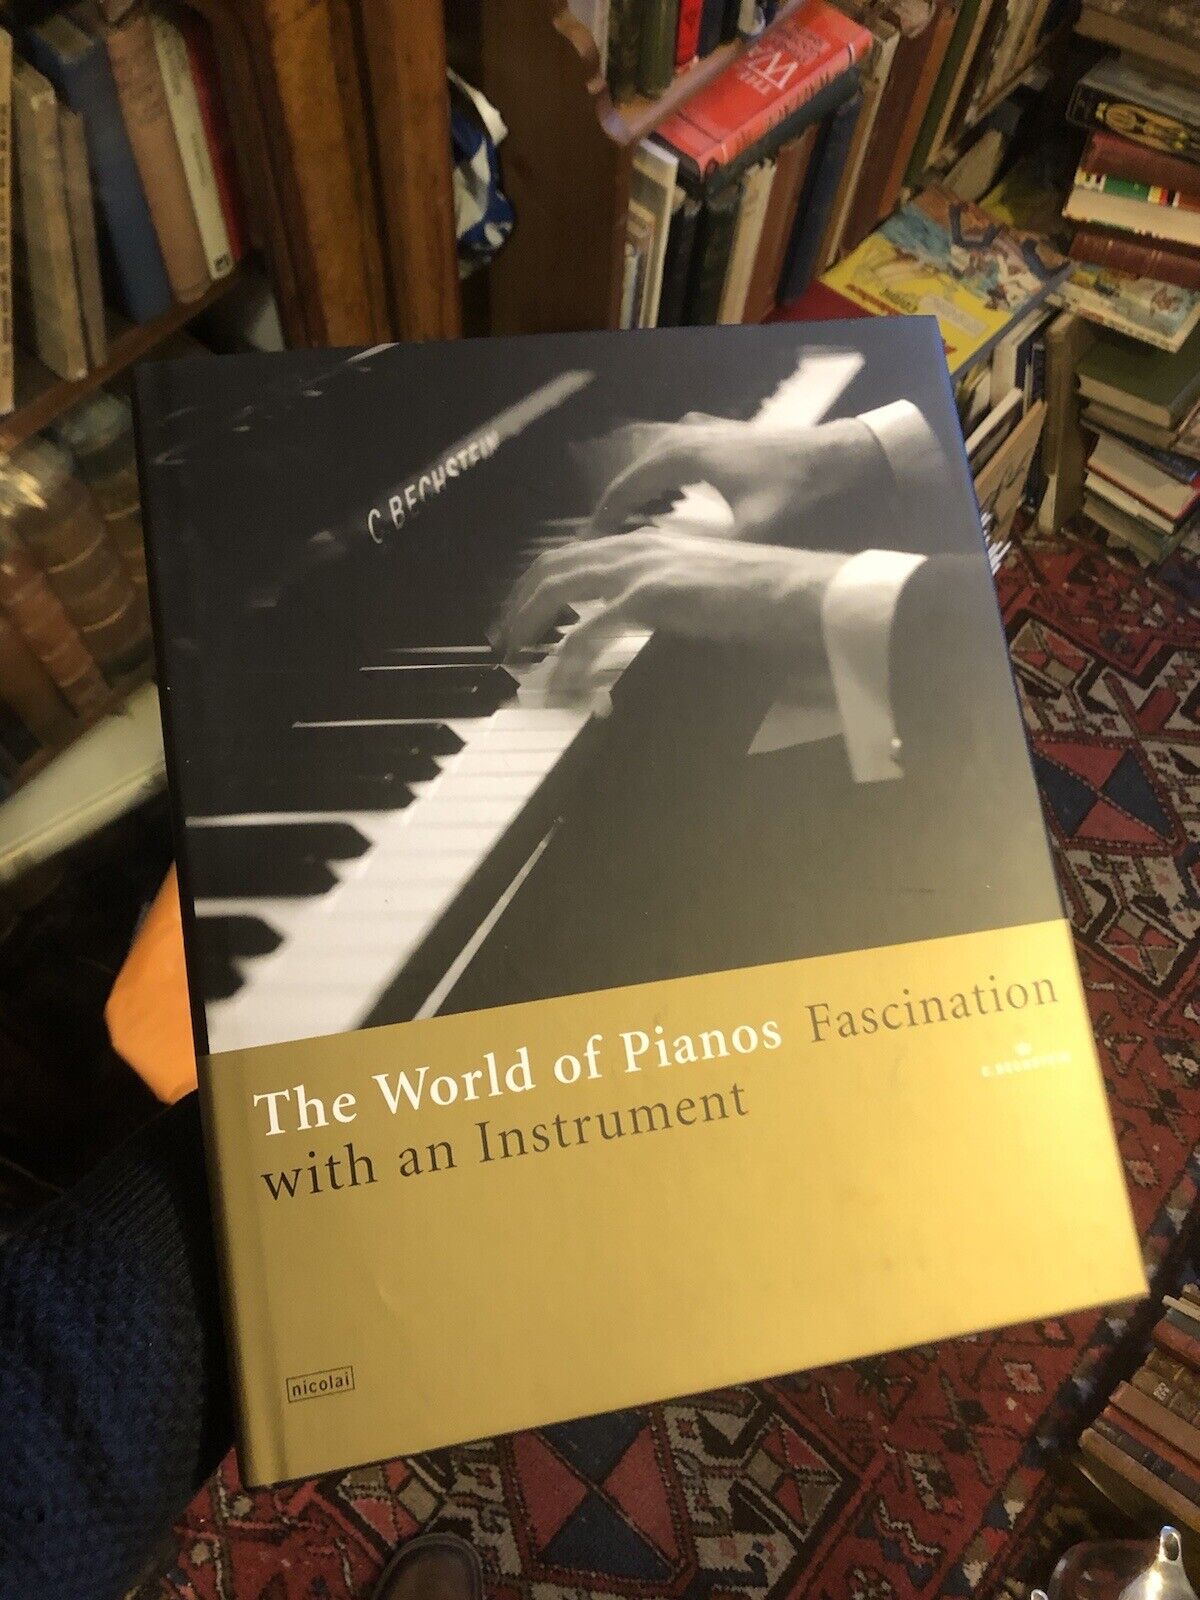 The World of Pianos : Fascination with an Instrument : Bechstein Company